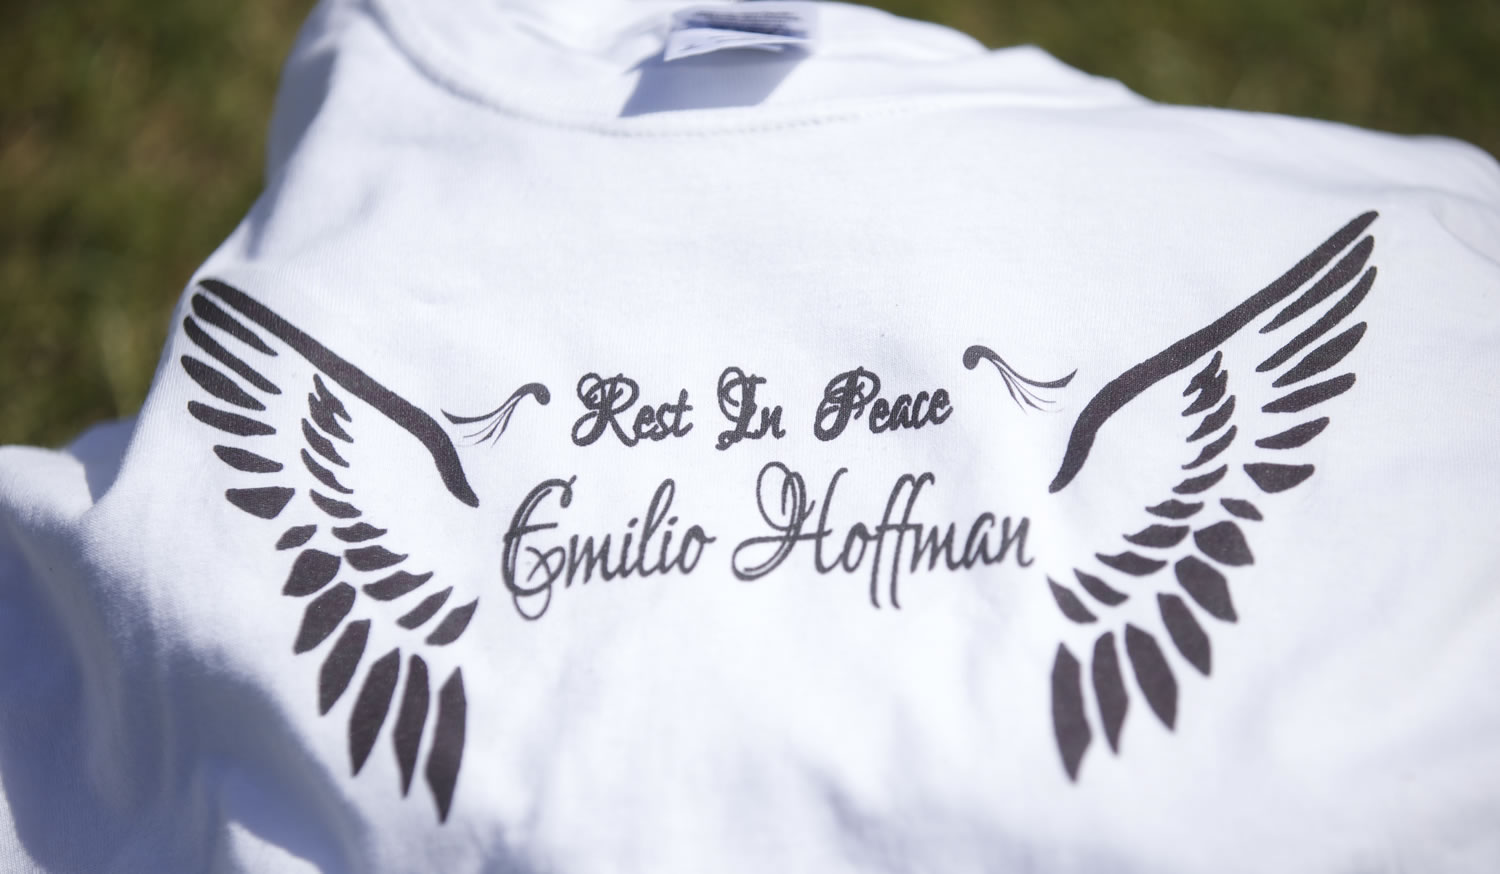 One of a stack of T-shirts, brought by a woman who didn't want to be identified, has &quot;Rest In Peace Emilio Hoffman&quot; and a pair of wings of each side on Wednesday outside Reynolds High School in Troutdale, Ore.